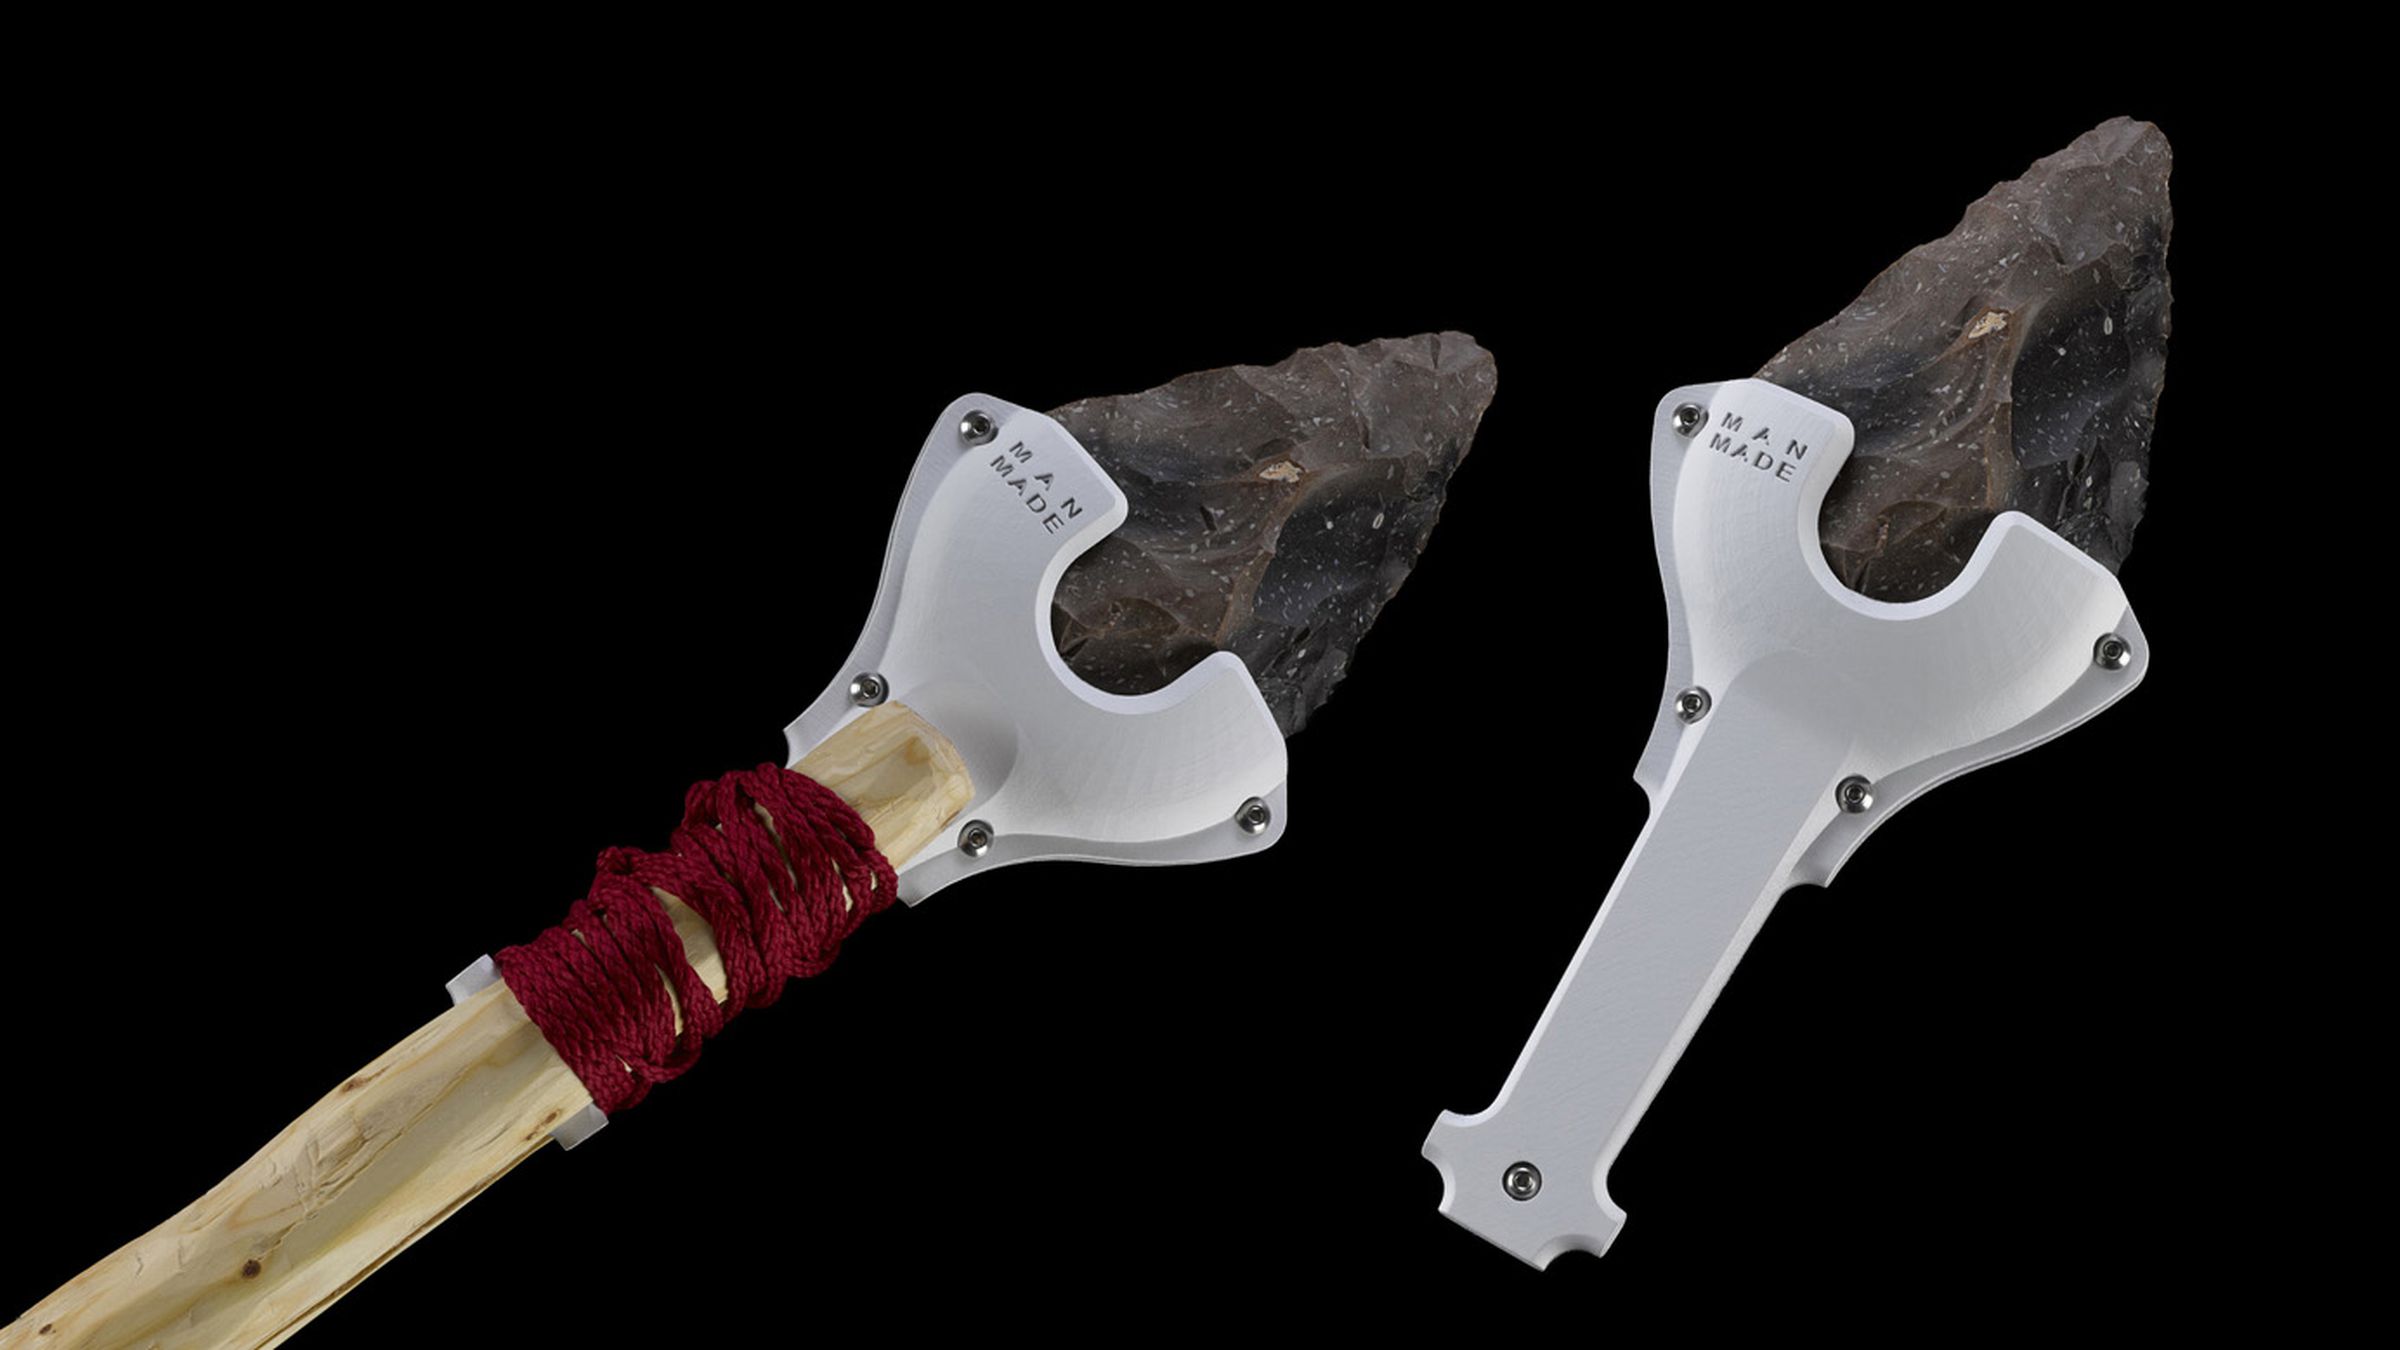 3D-printed stone age tools